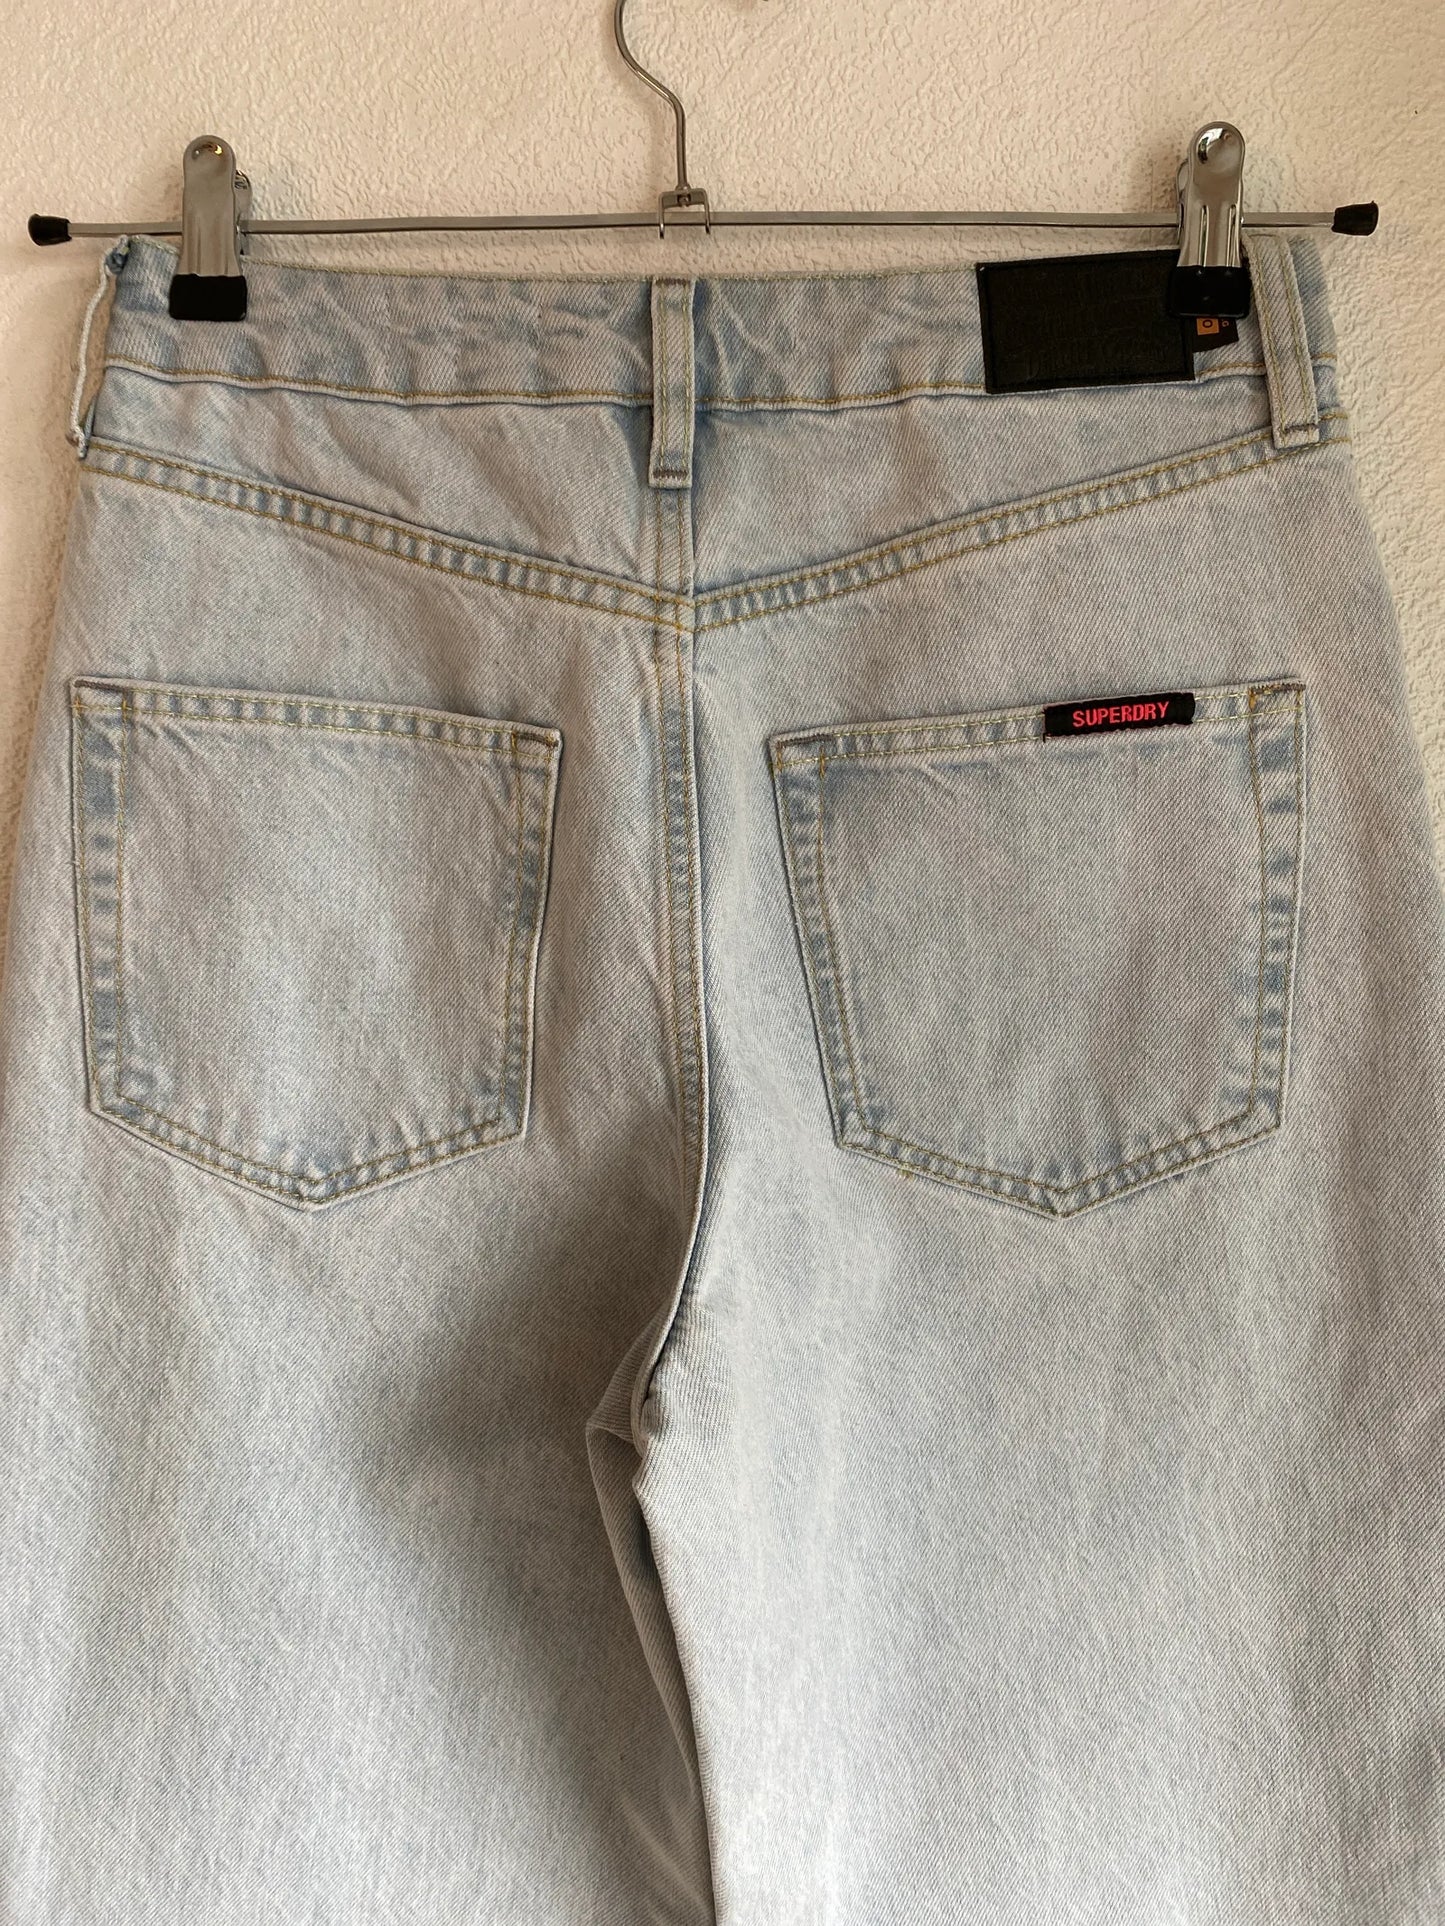 Superdry-jeans NWT